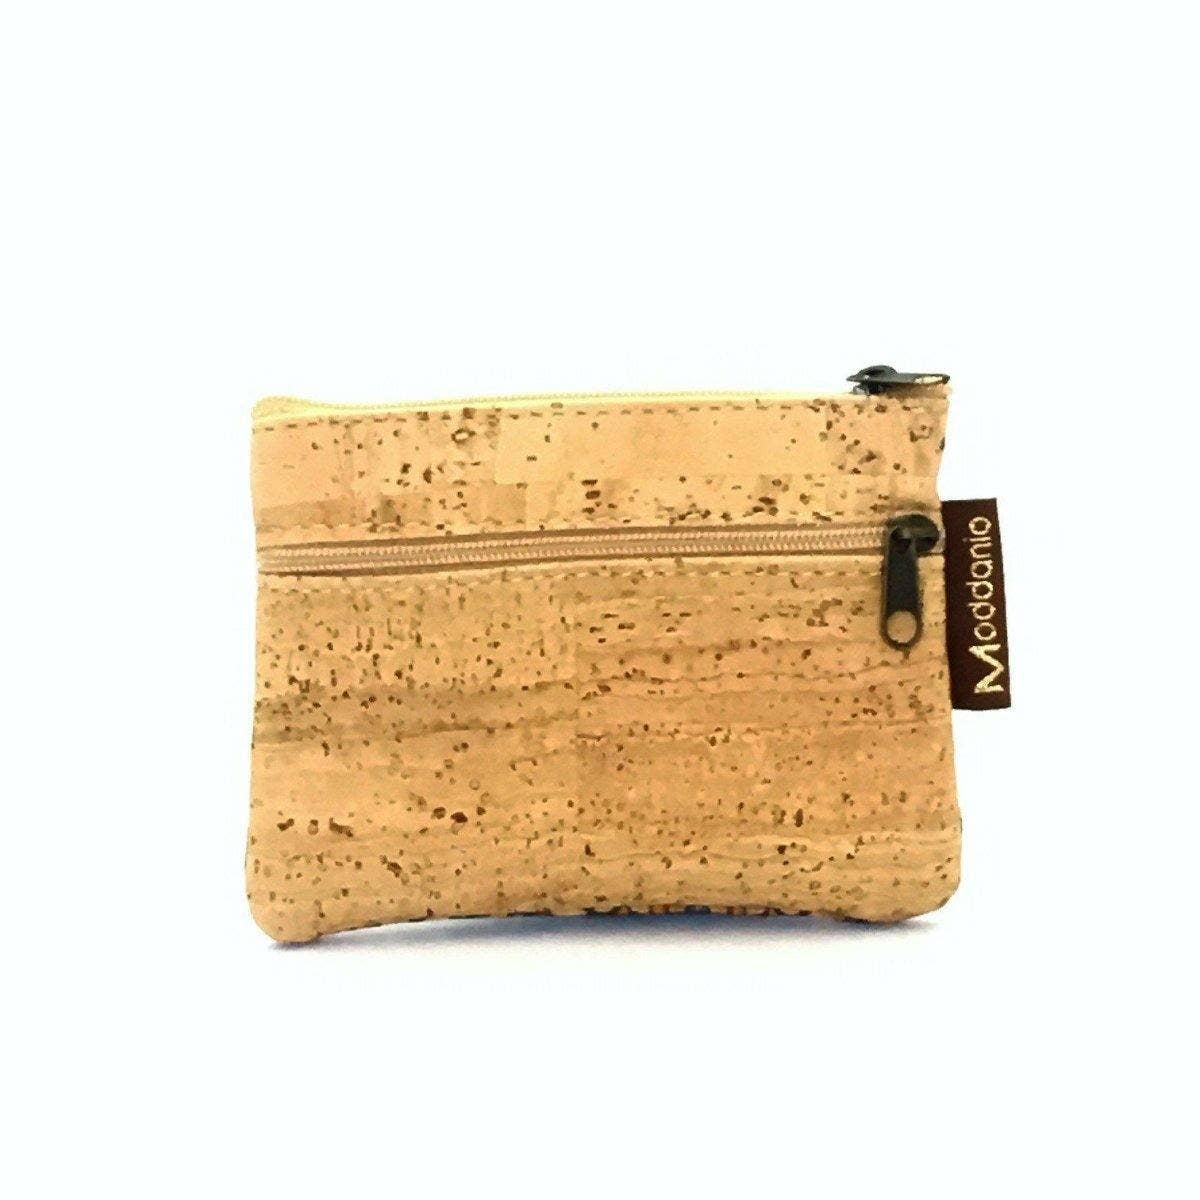 Cork Coin Purse and Vegan Change Pouch in a blue geometric pattern